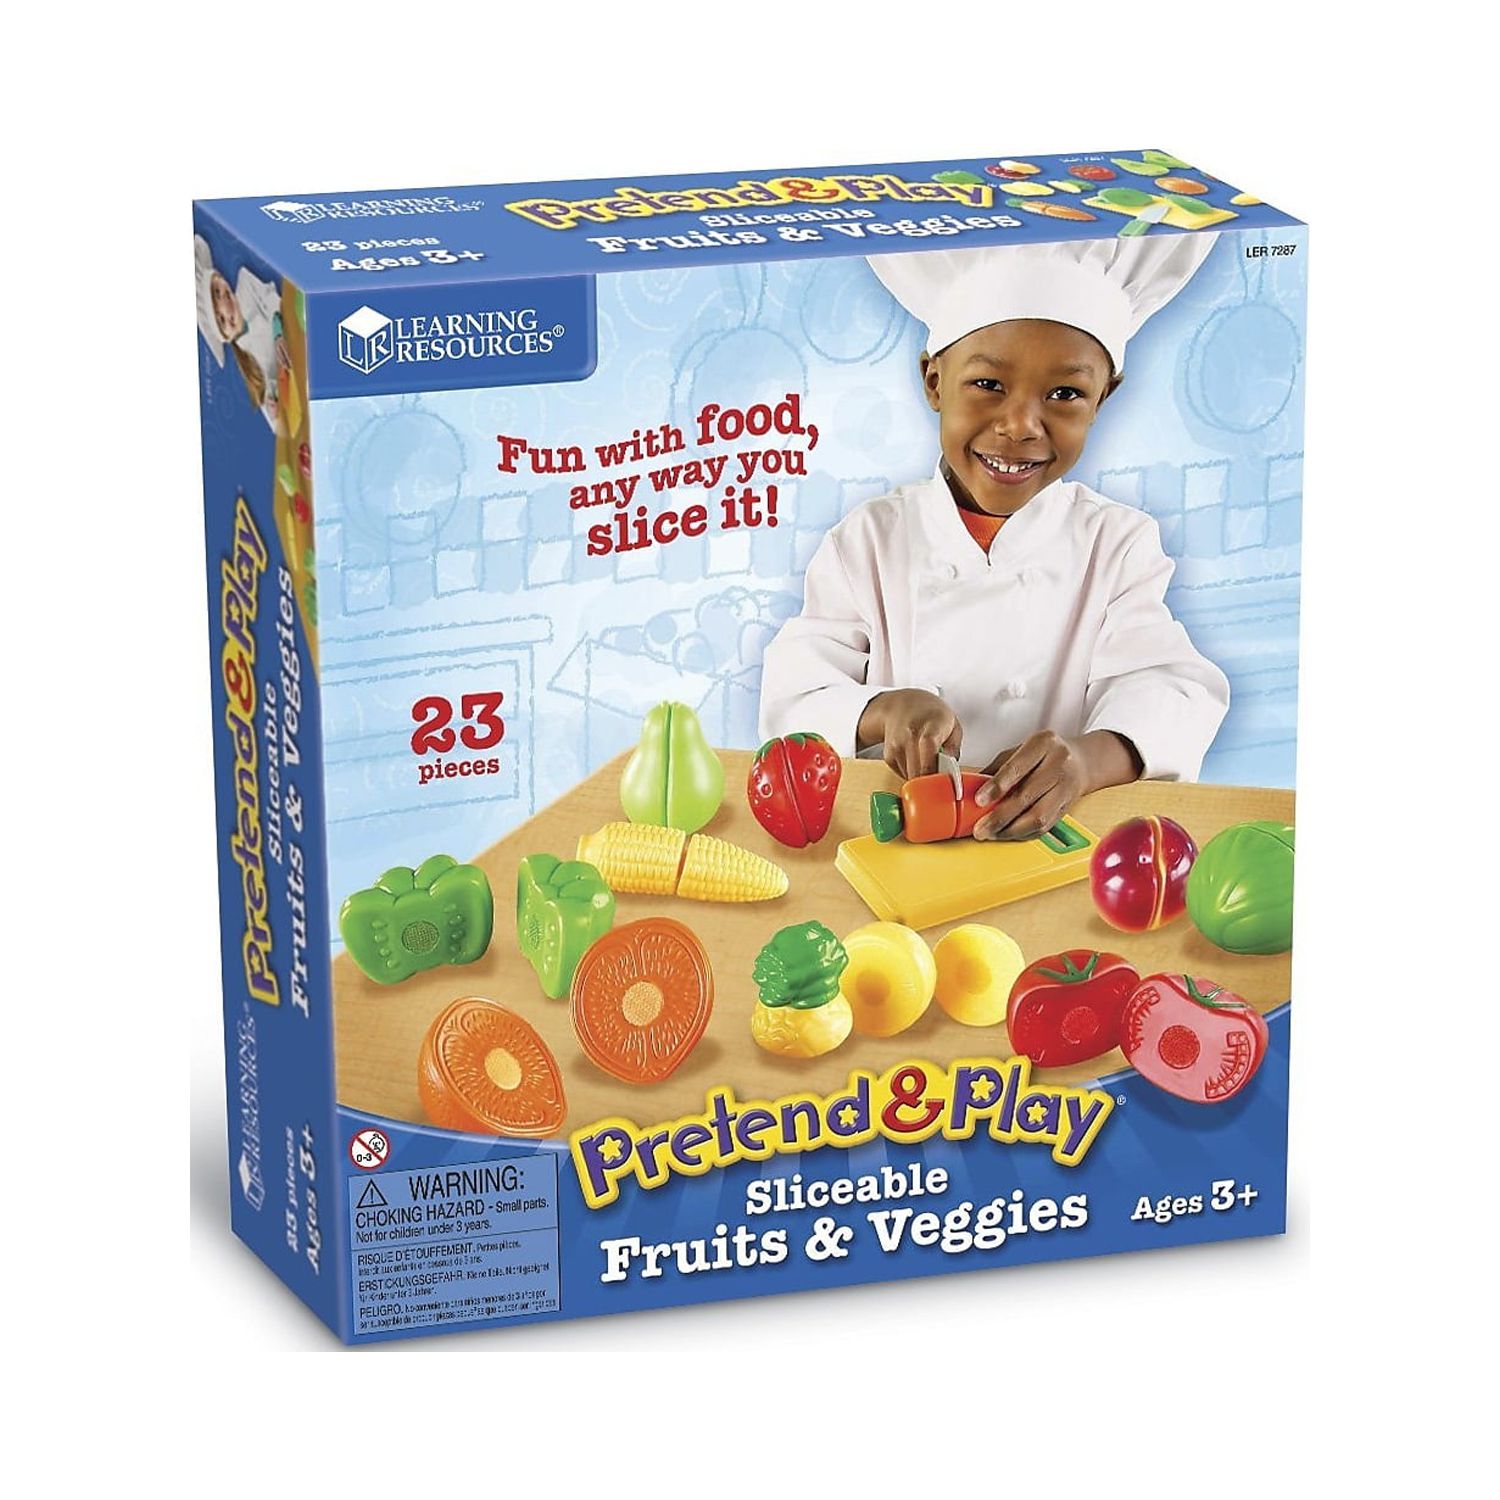 Learning Resources Pretend & Play Sliceable Fruits & Veggies - 23 Pieces, Boys and Girls Ages 3+, Food Play Set, Pretend Food For Toddlers - image 1 of 3